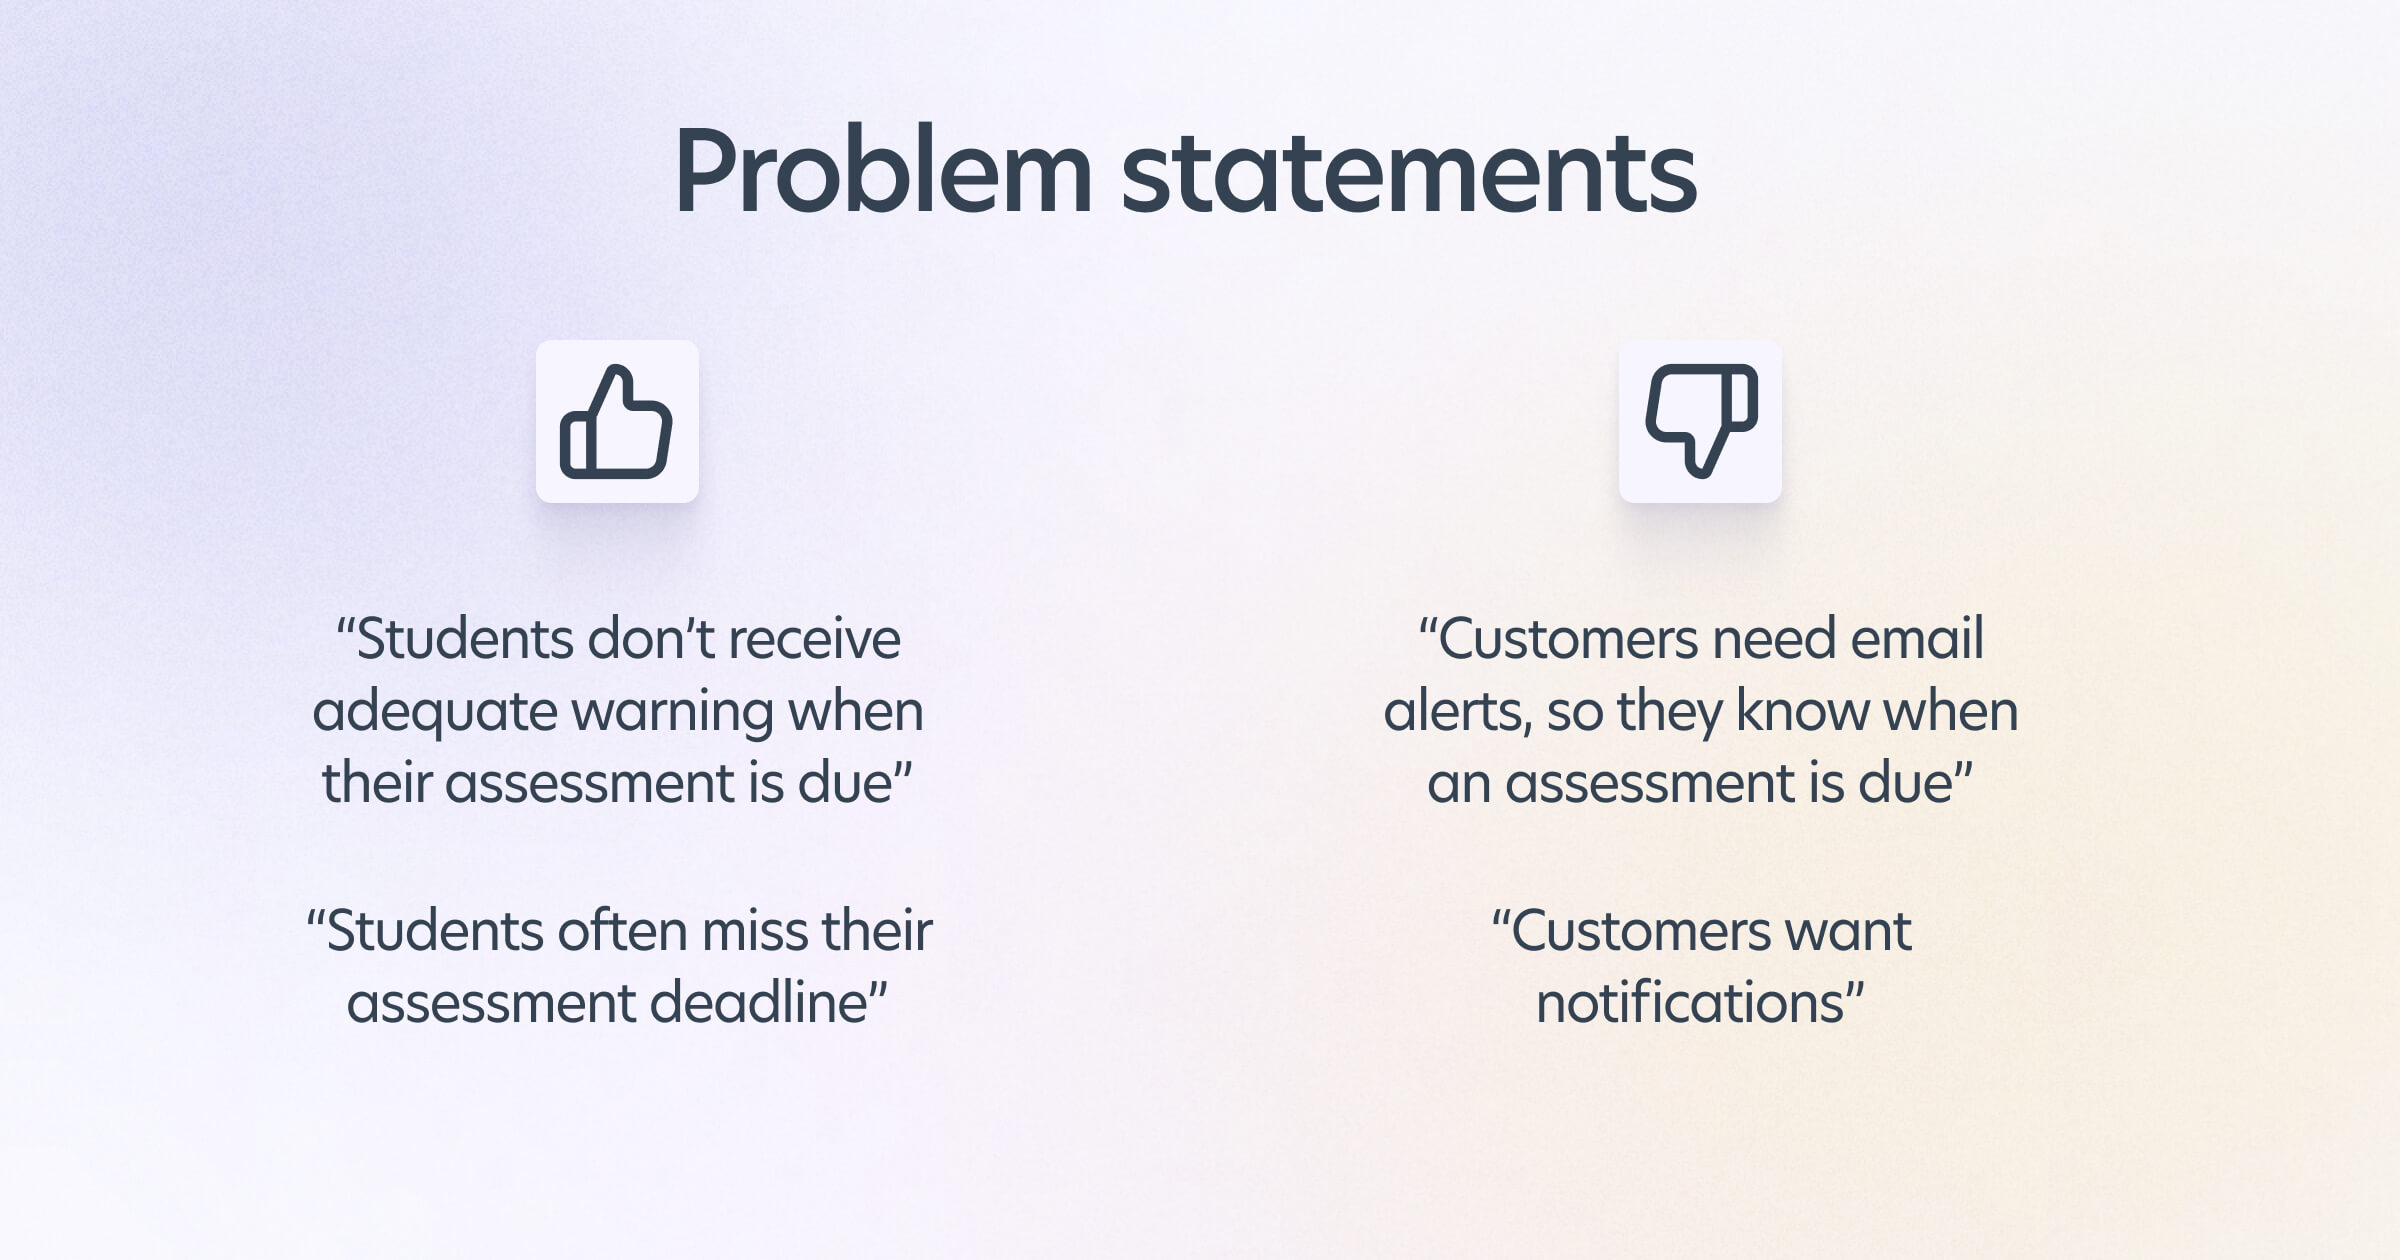 Examples of good and bad problem statements